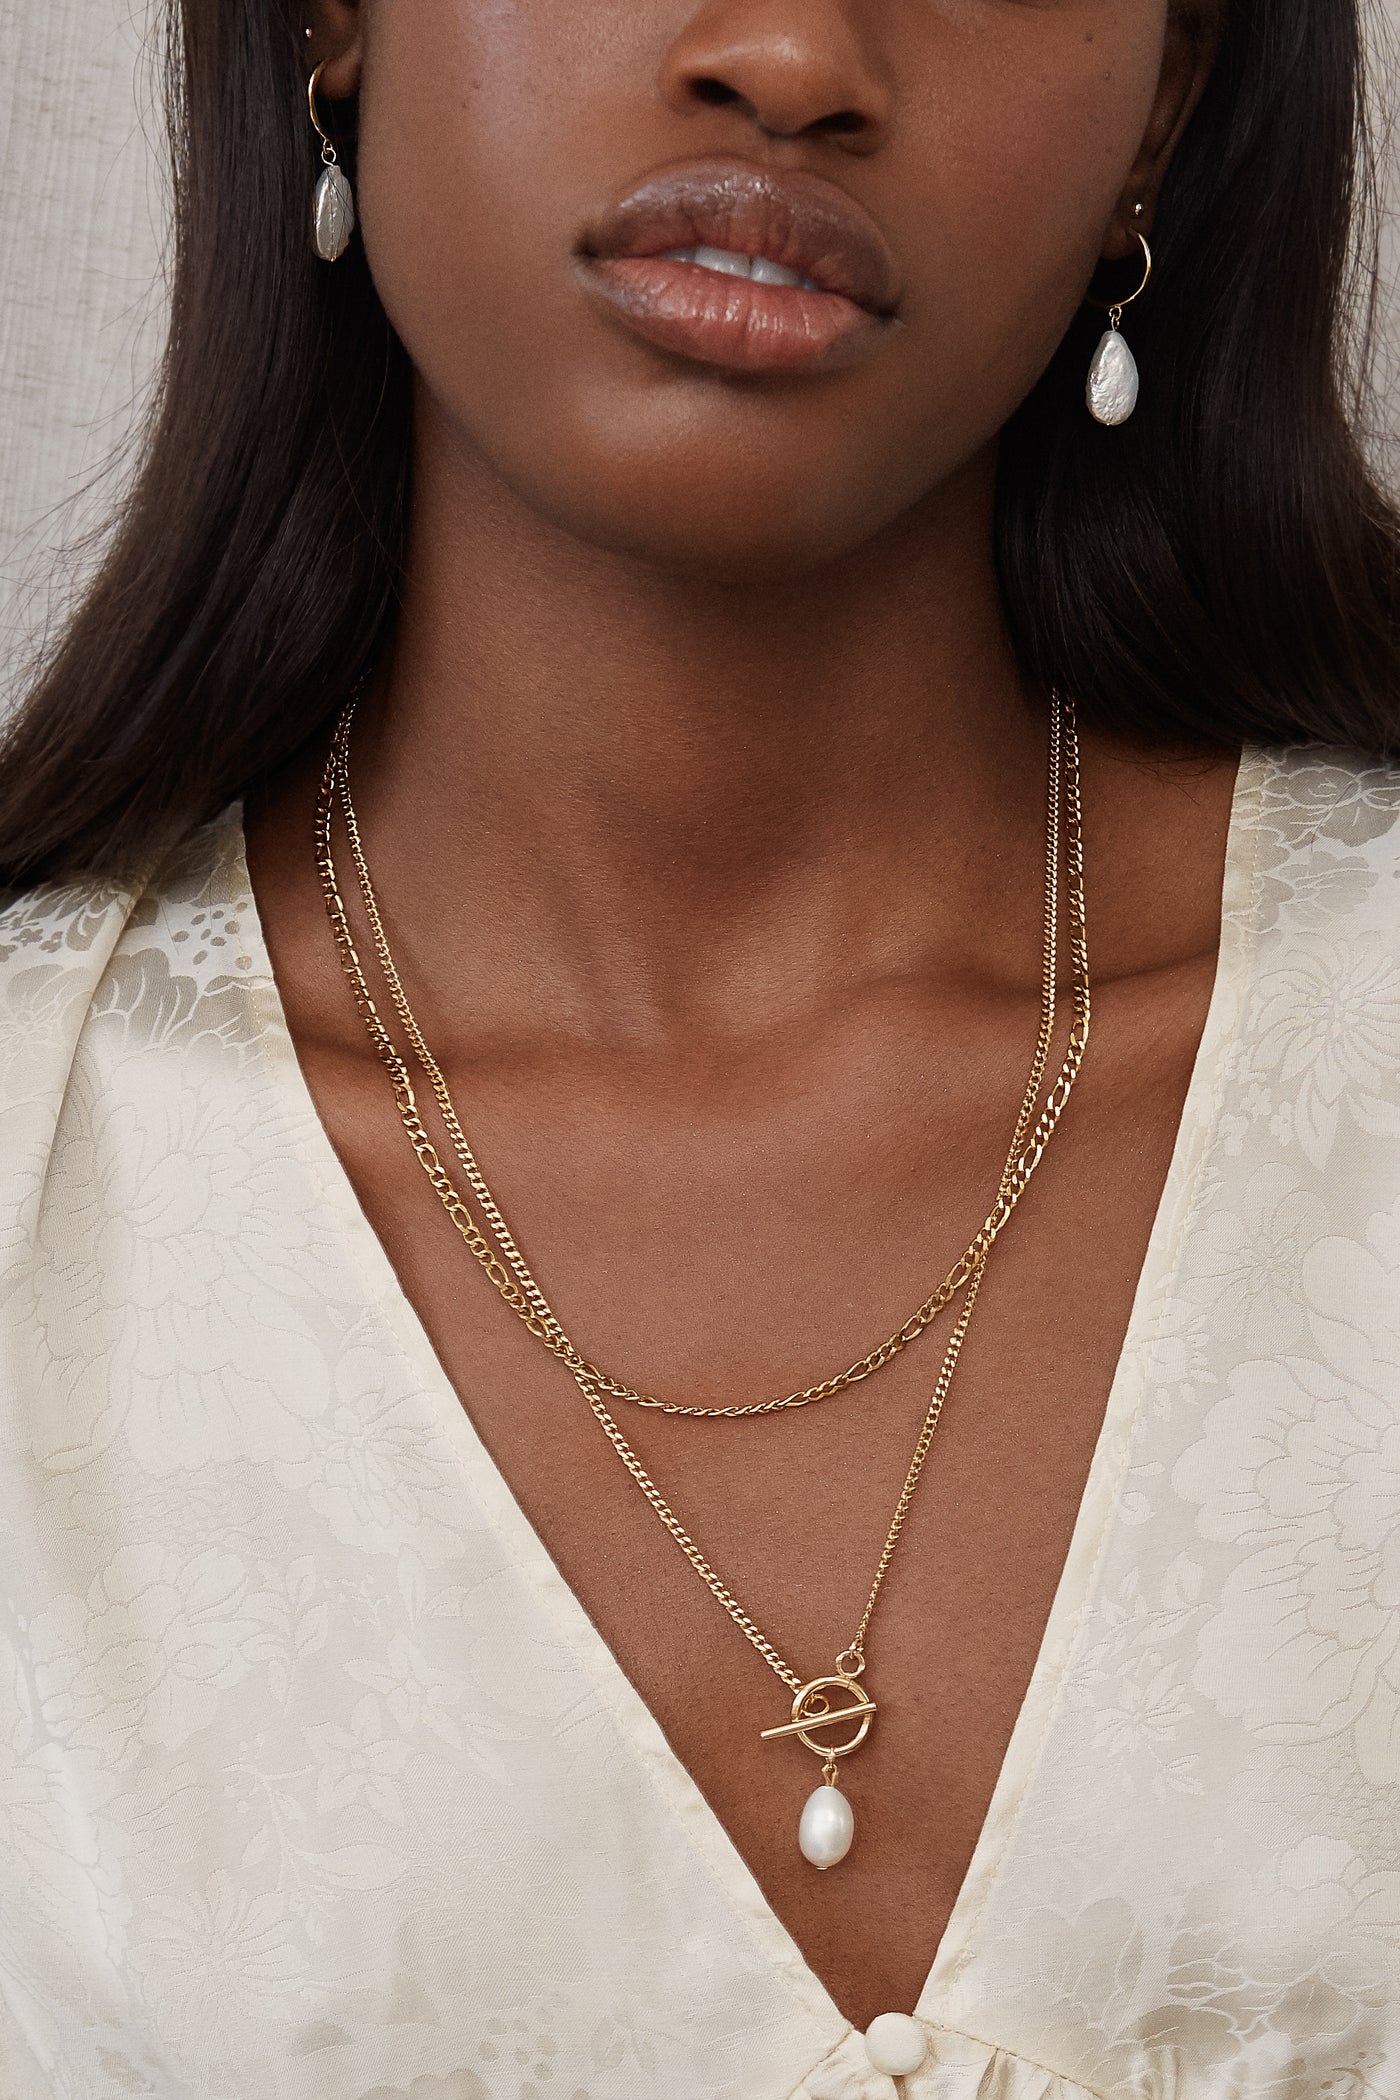 Freshwater Necklace - Gold